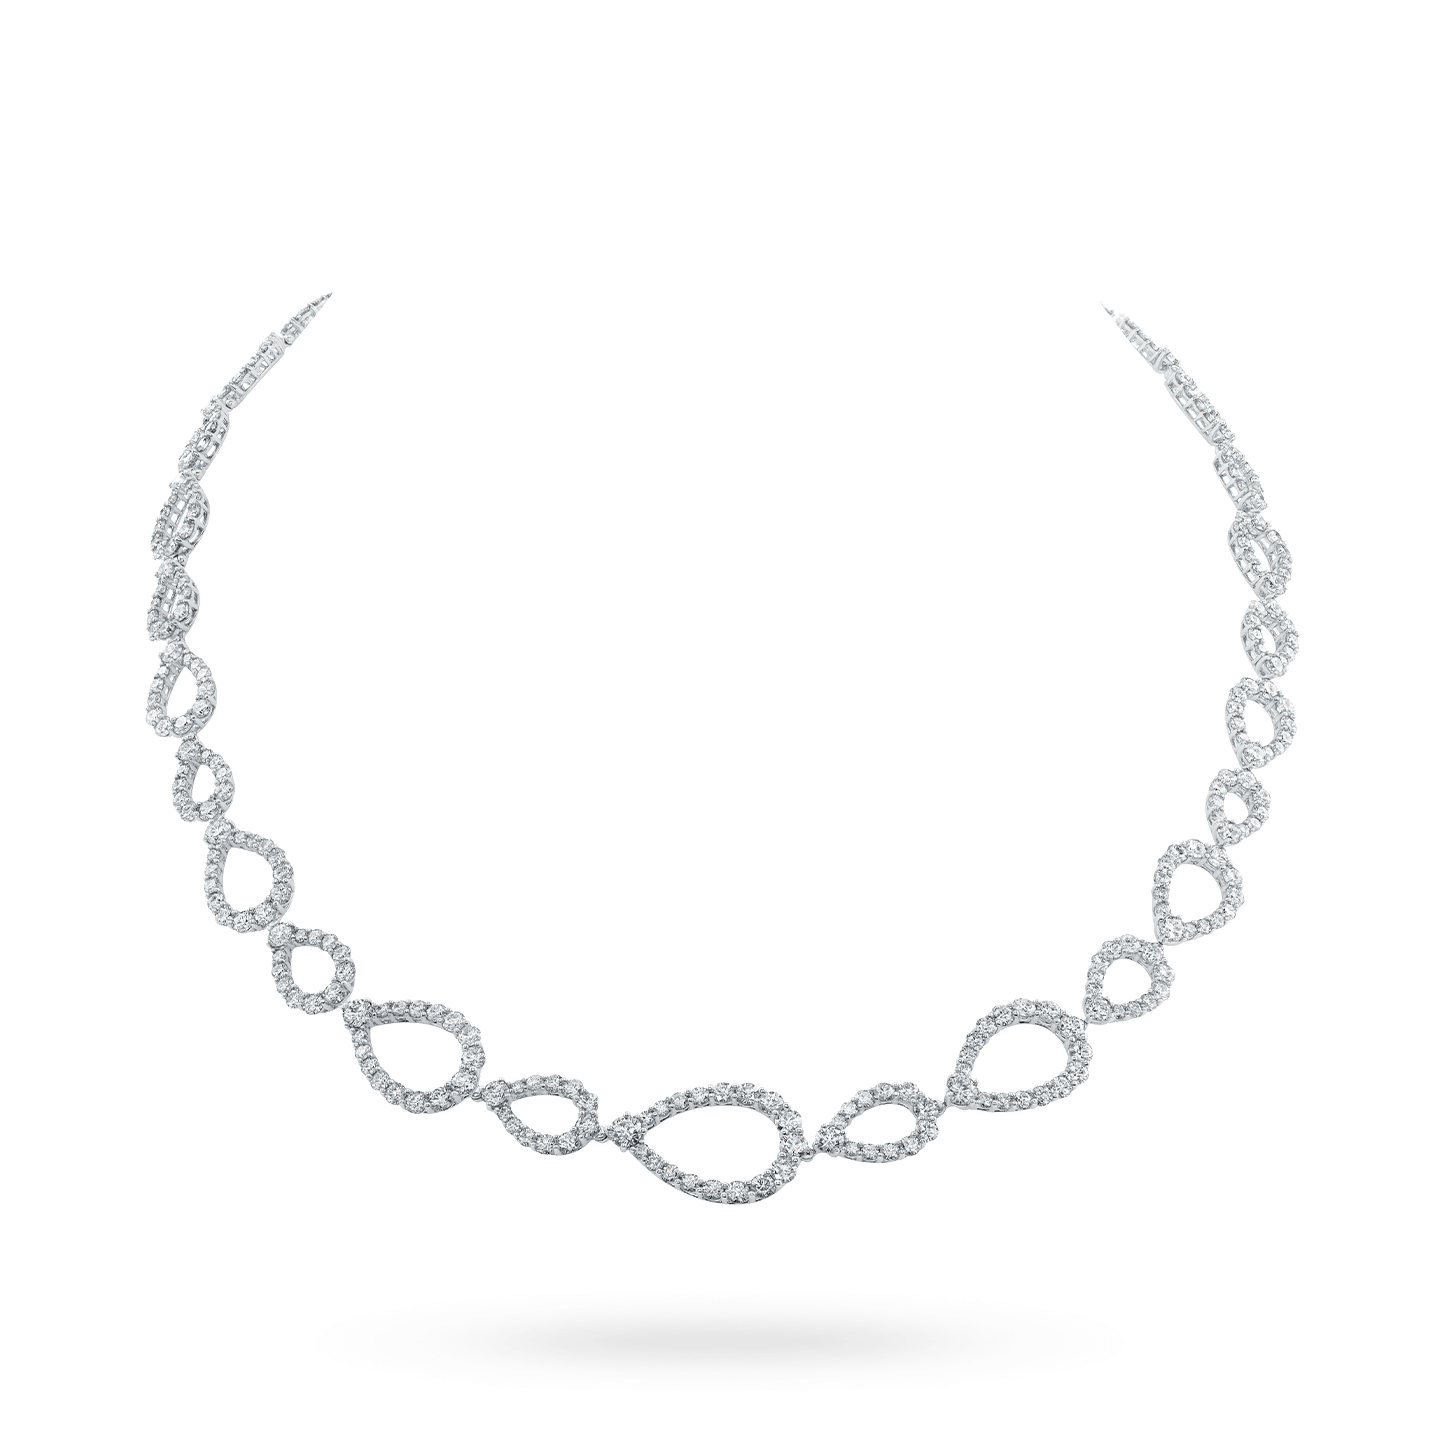 Forget-Me-Not Diamond Necklace | Harry Winston